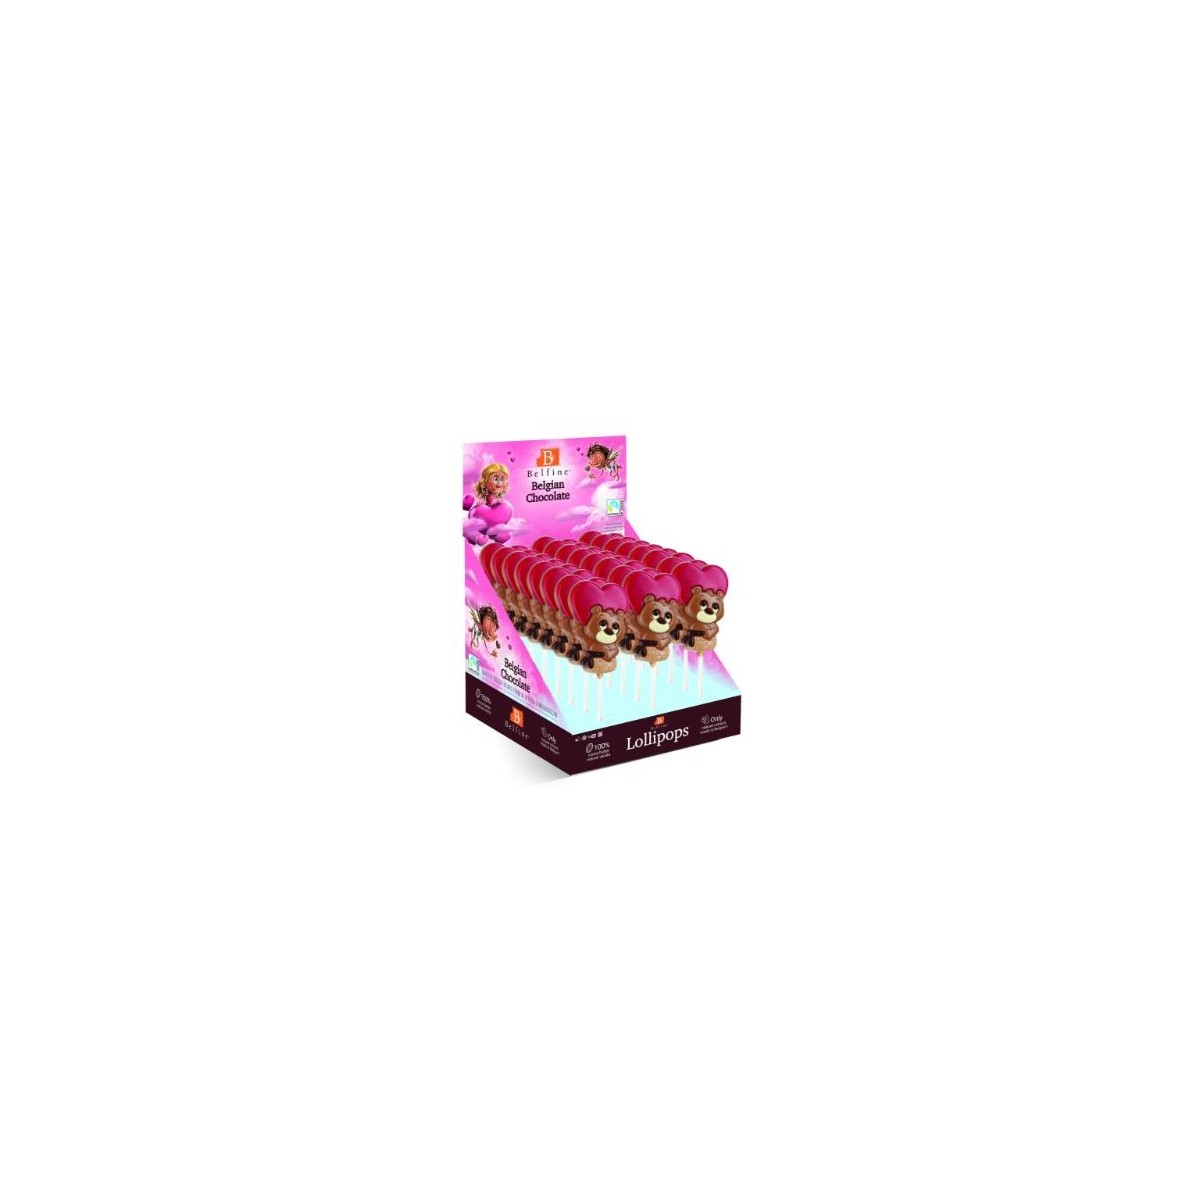 SUCETTES CHOCOLAT OURSONS ARNO 24 X 35GR